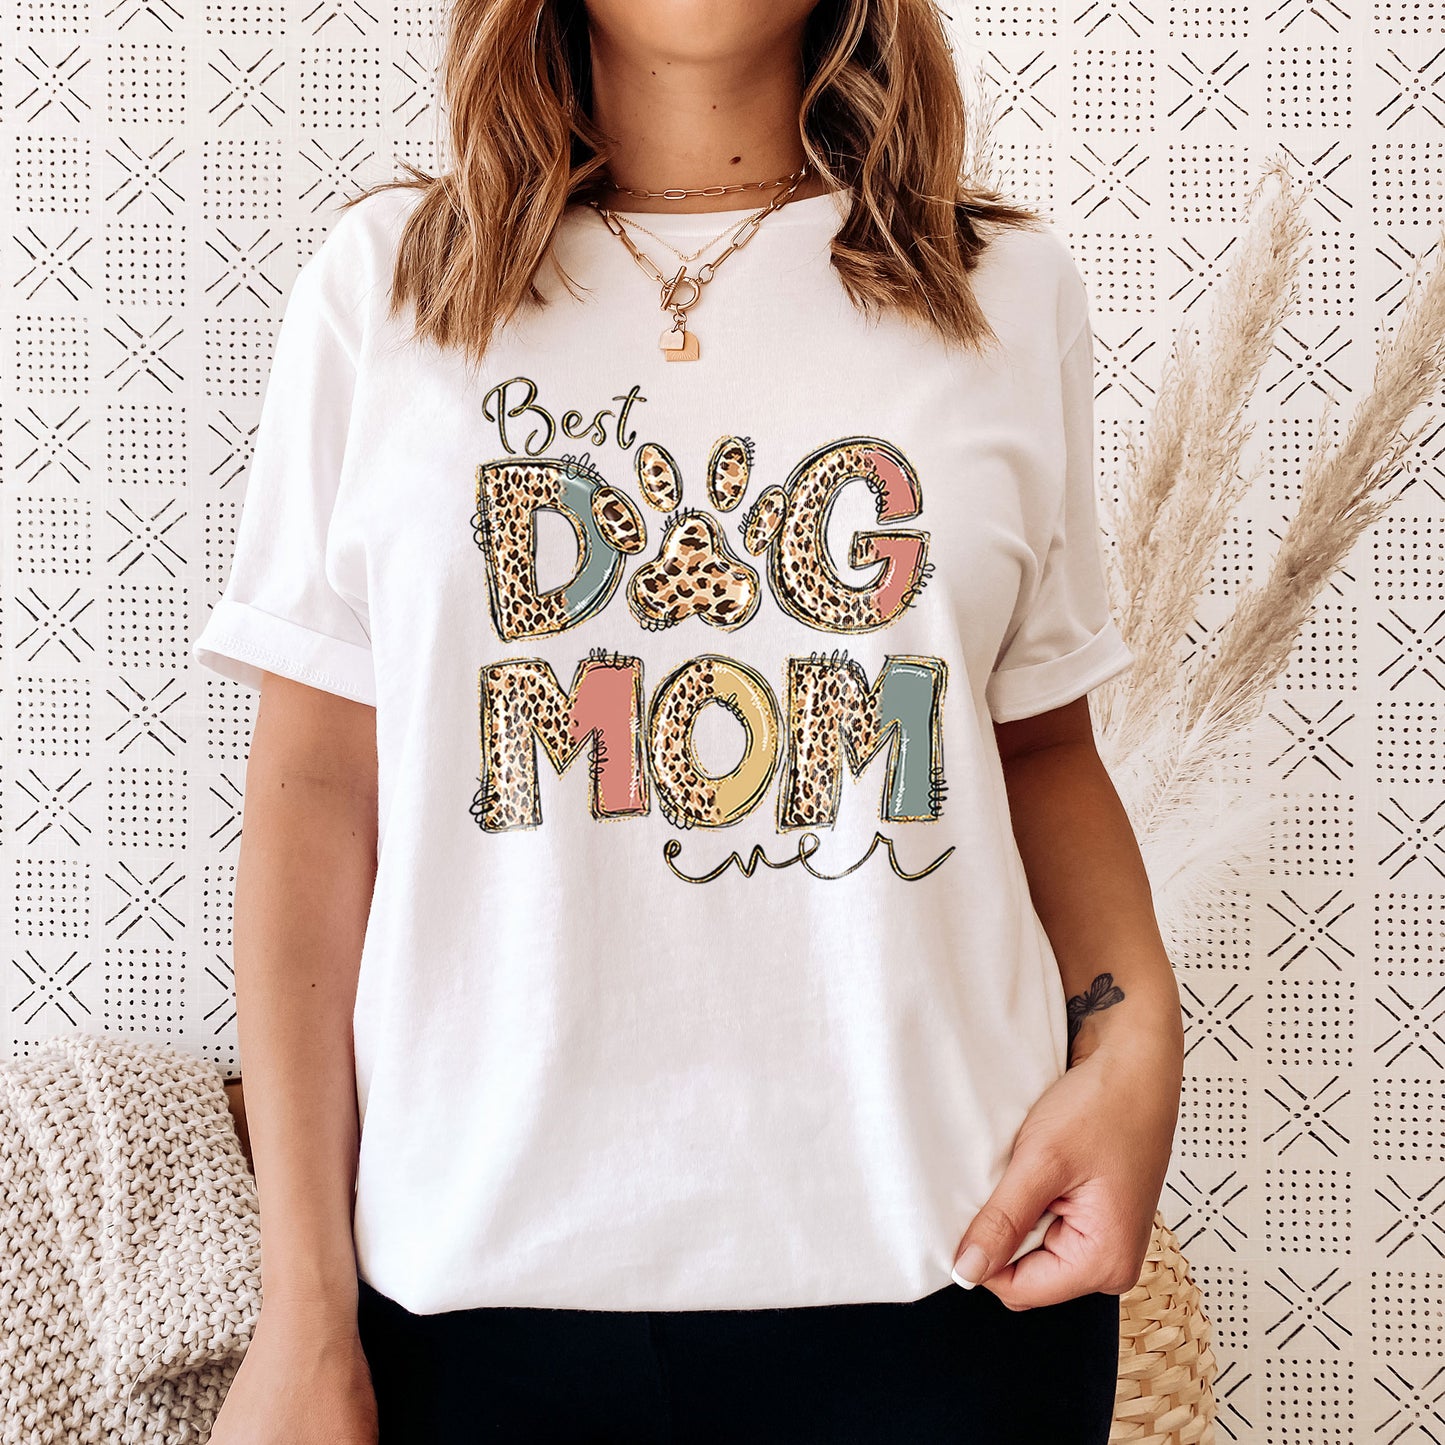 Best Dog Mom Ever Shirt - Leopard Funny Sayings - Dog Lovers Shirt